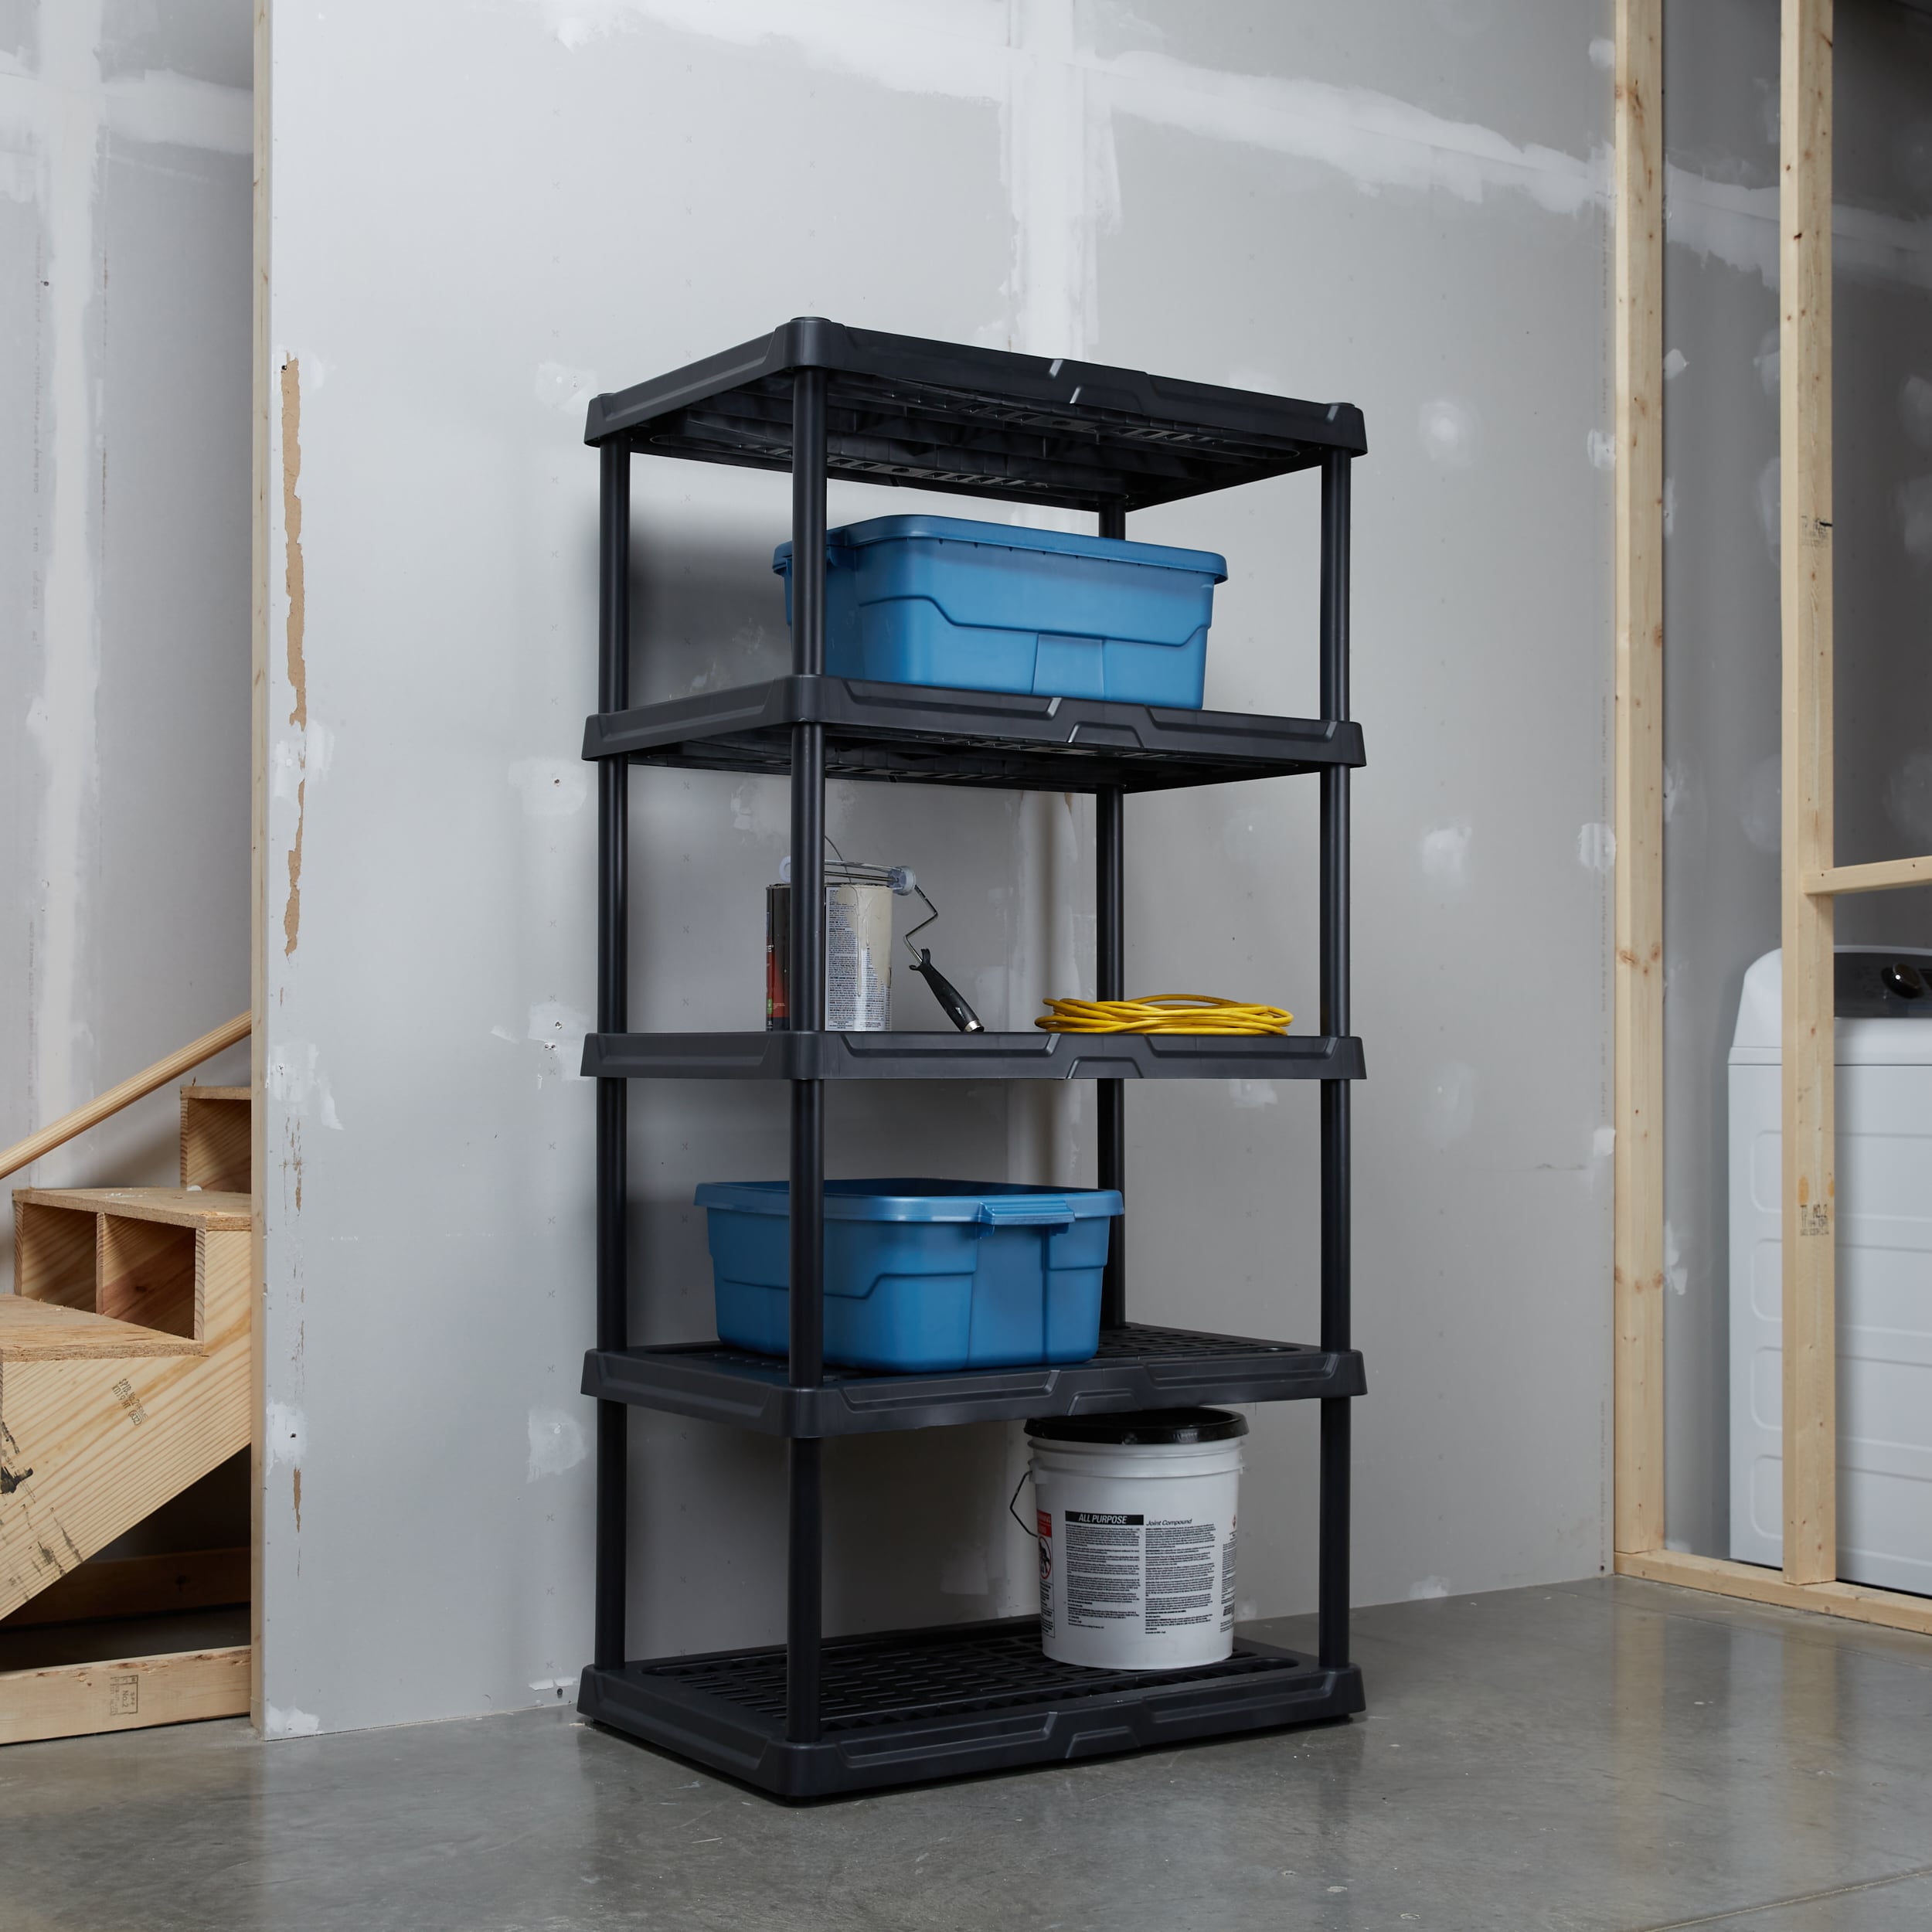 Craftsman 24-in D x 40-in W x 72-in H 5-Tier Plastic Utility Shelving Unit